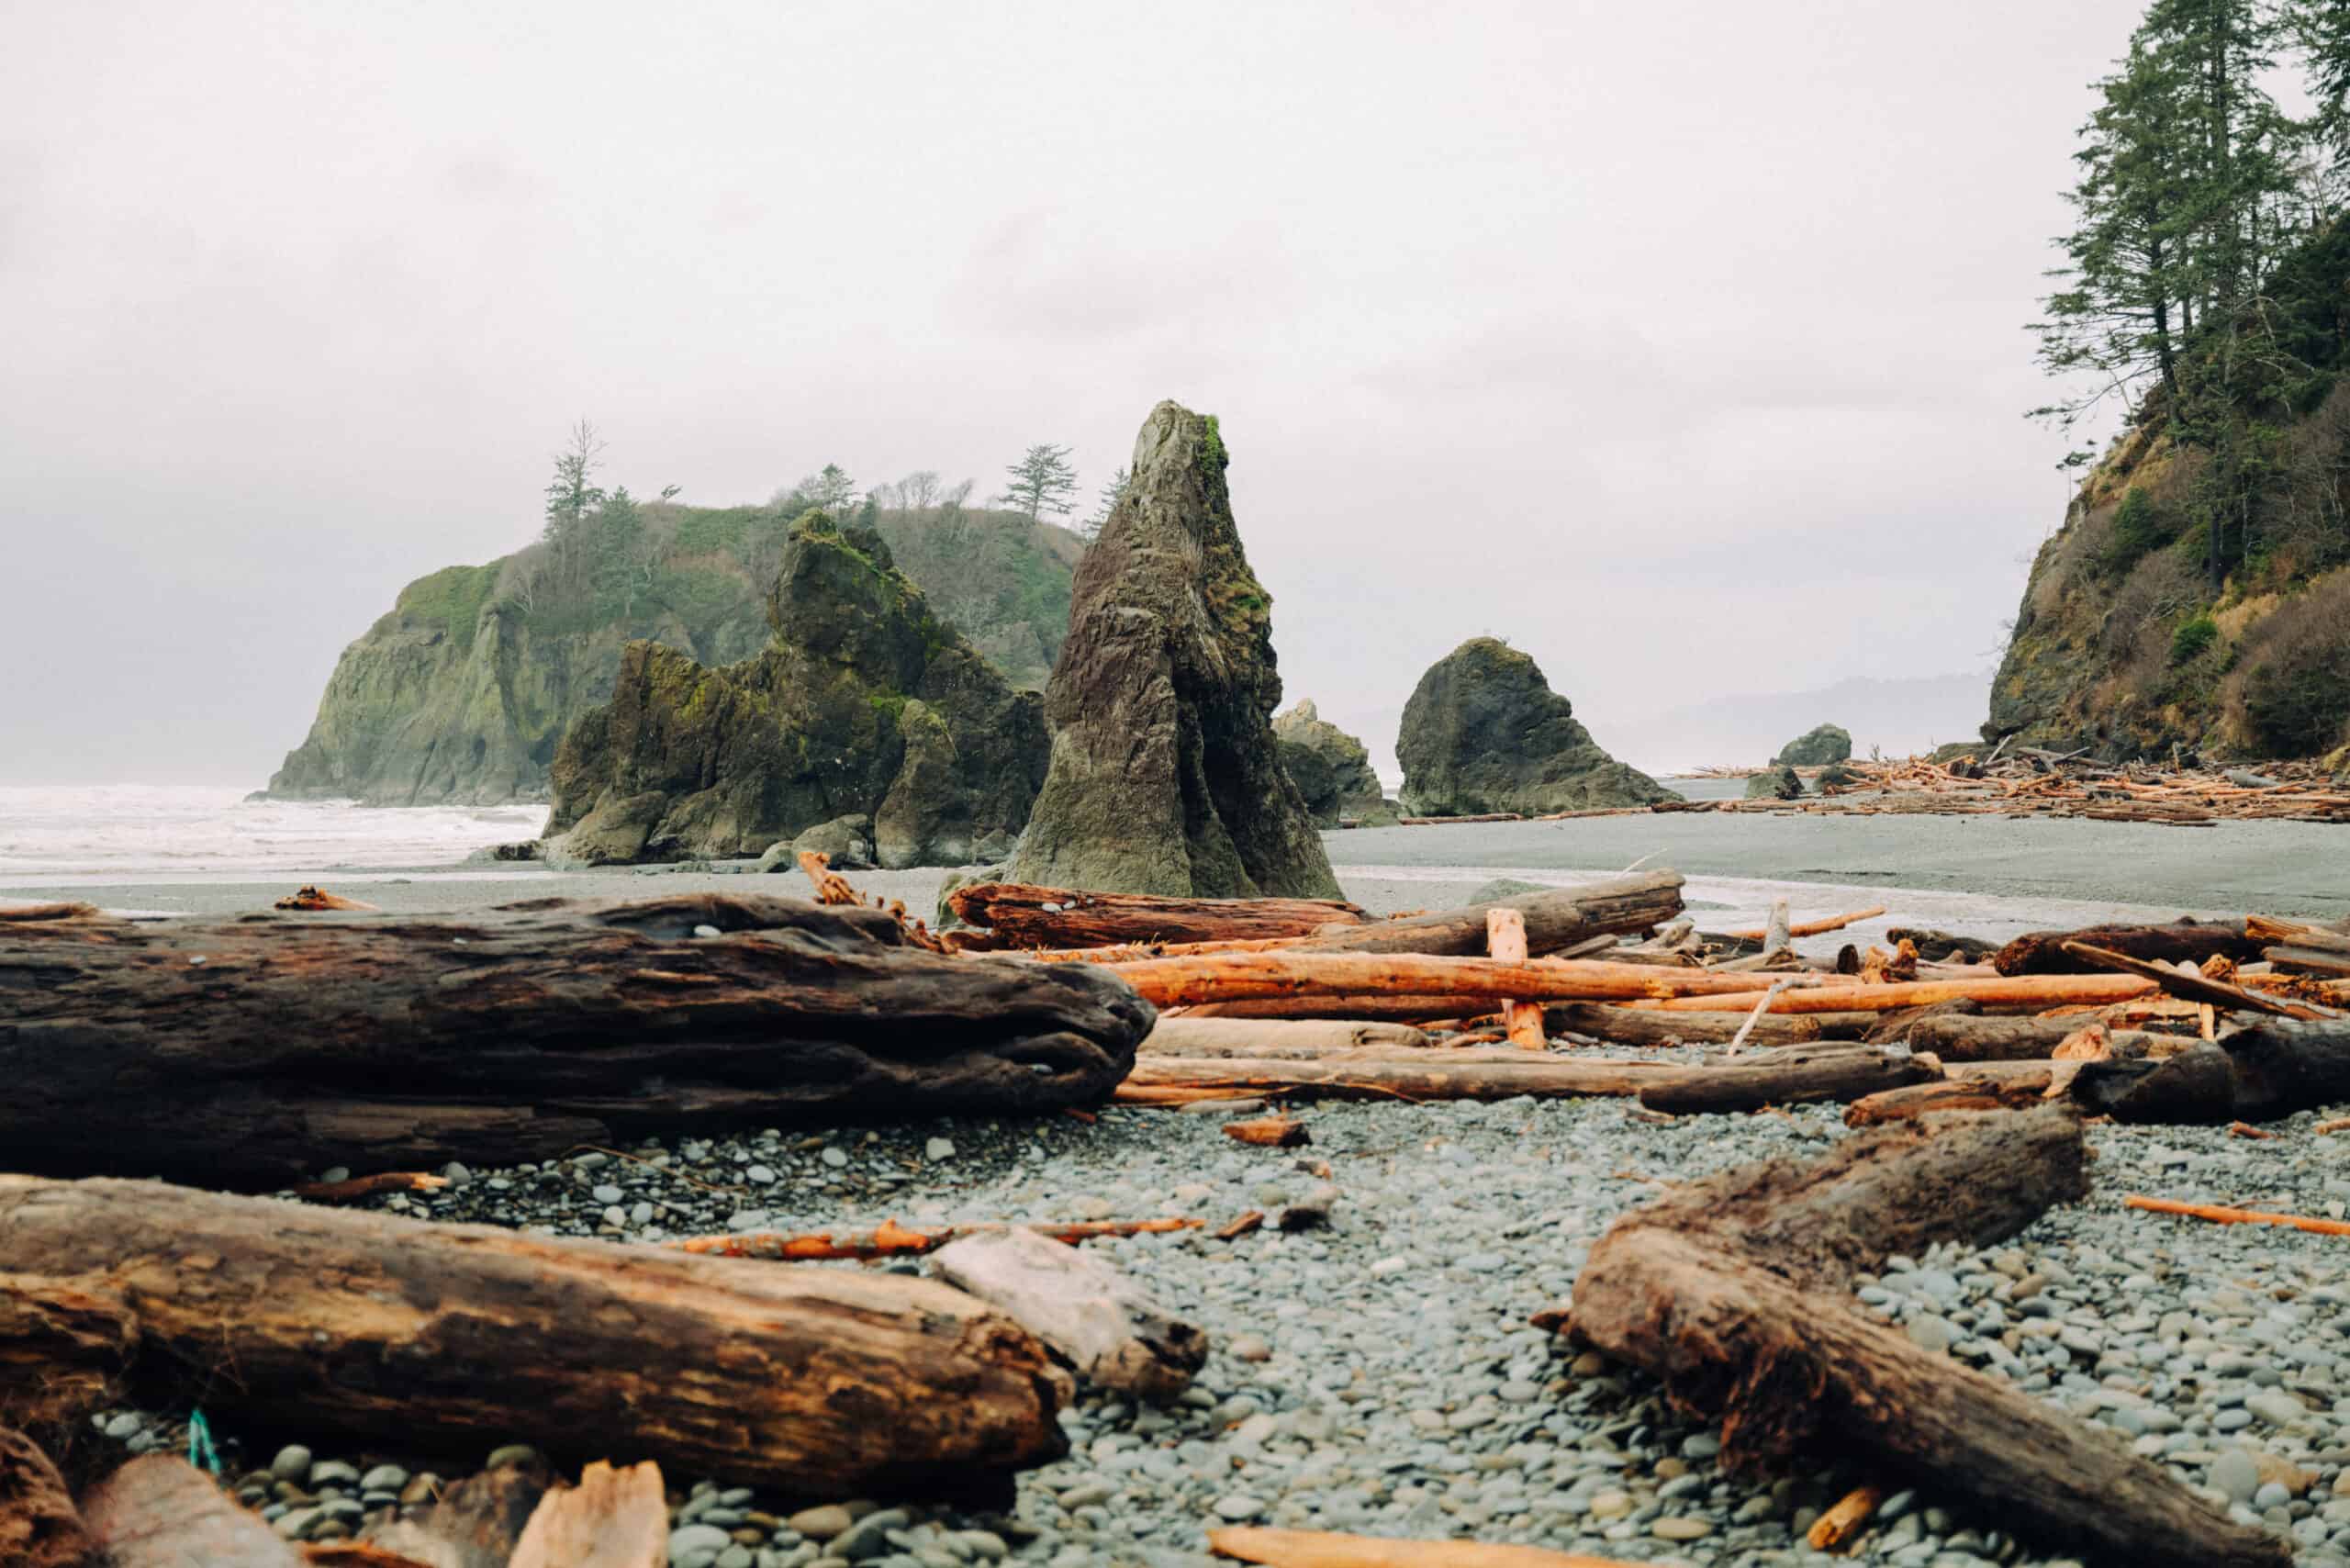 The Ultimate Guide To Ruby Beach on The Olympic Peninsula